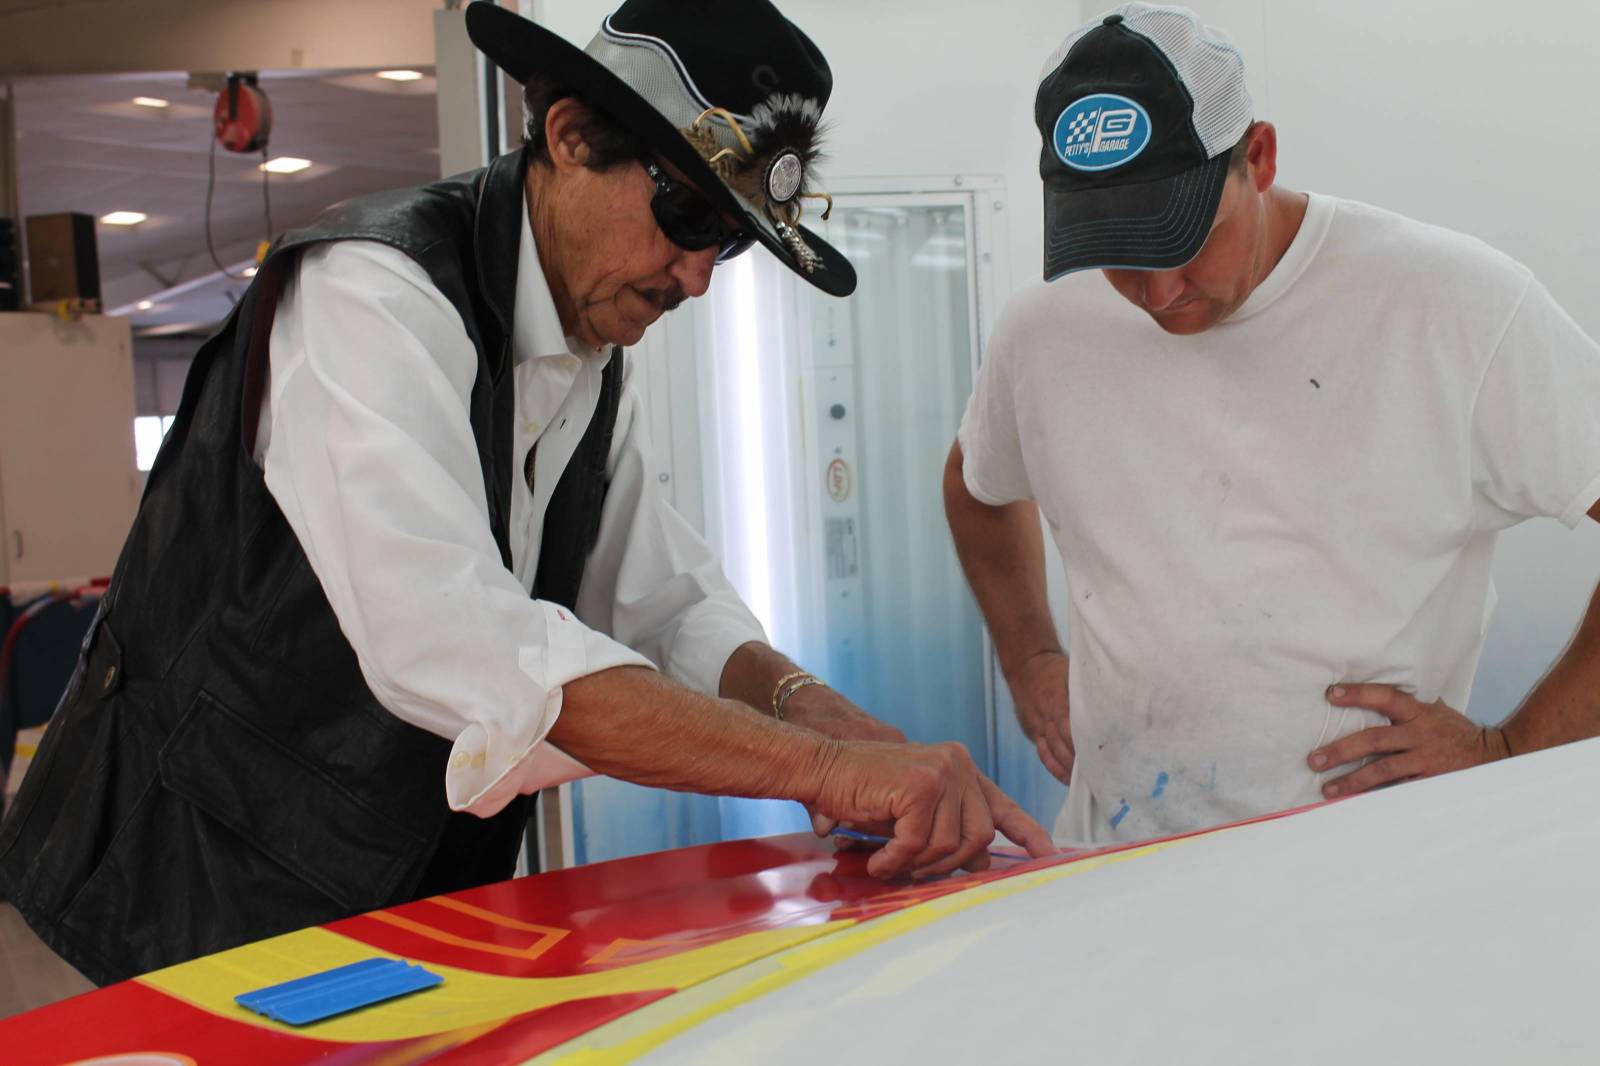 Richard Petty to Auction Off Another Custom Mustang for Veterans